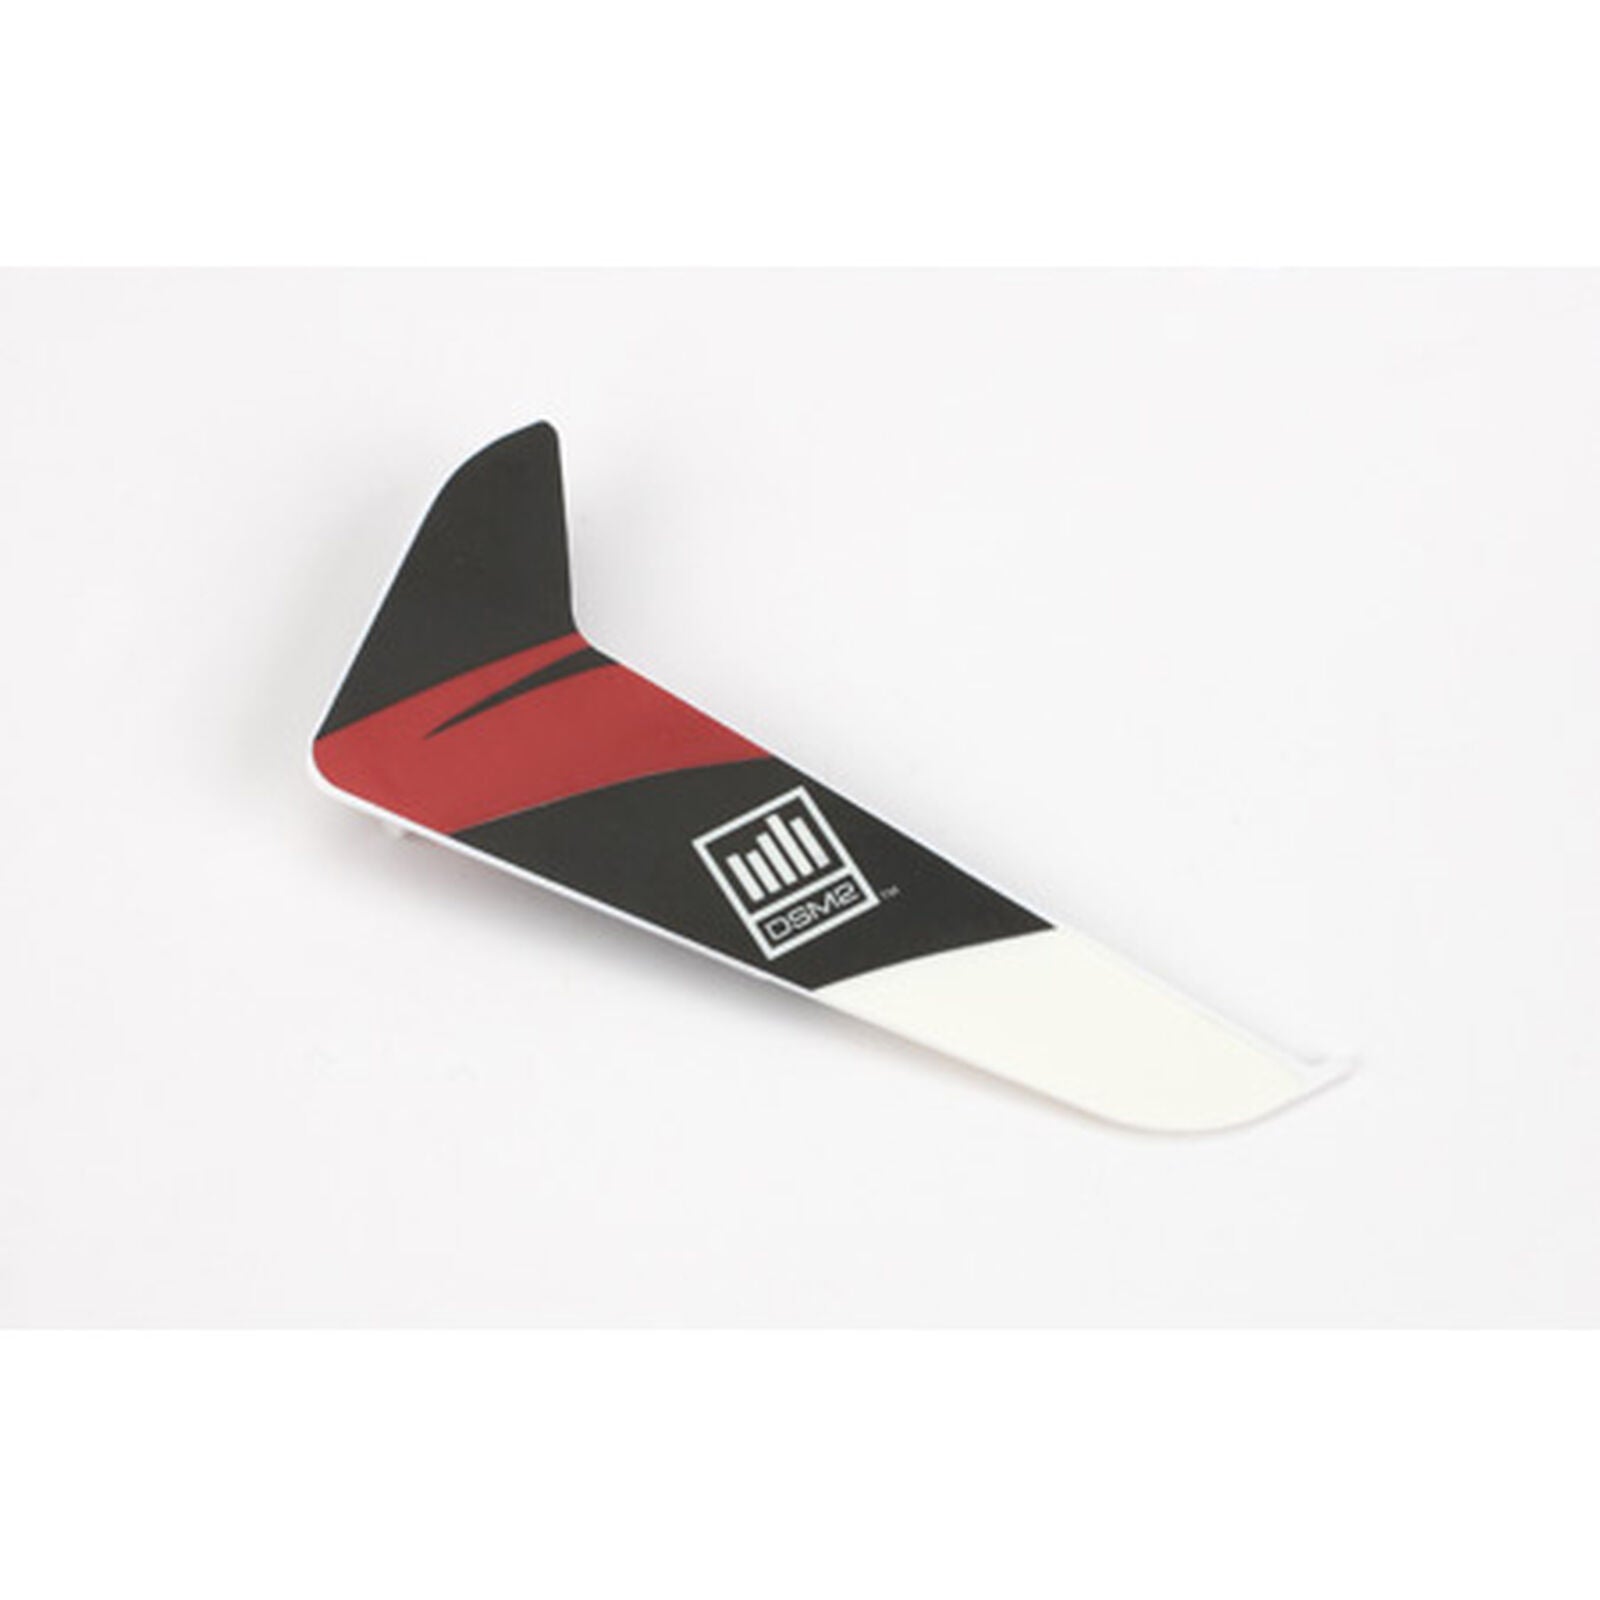 EFLITE BLADE BLH3120R Vertical Fin With Red Decal 120SR